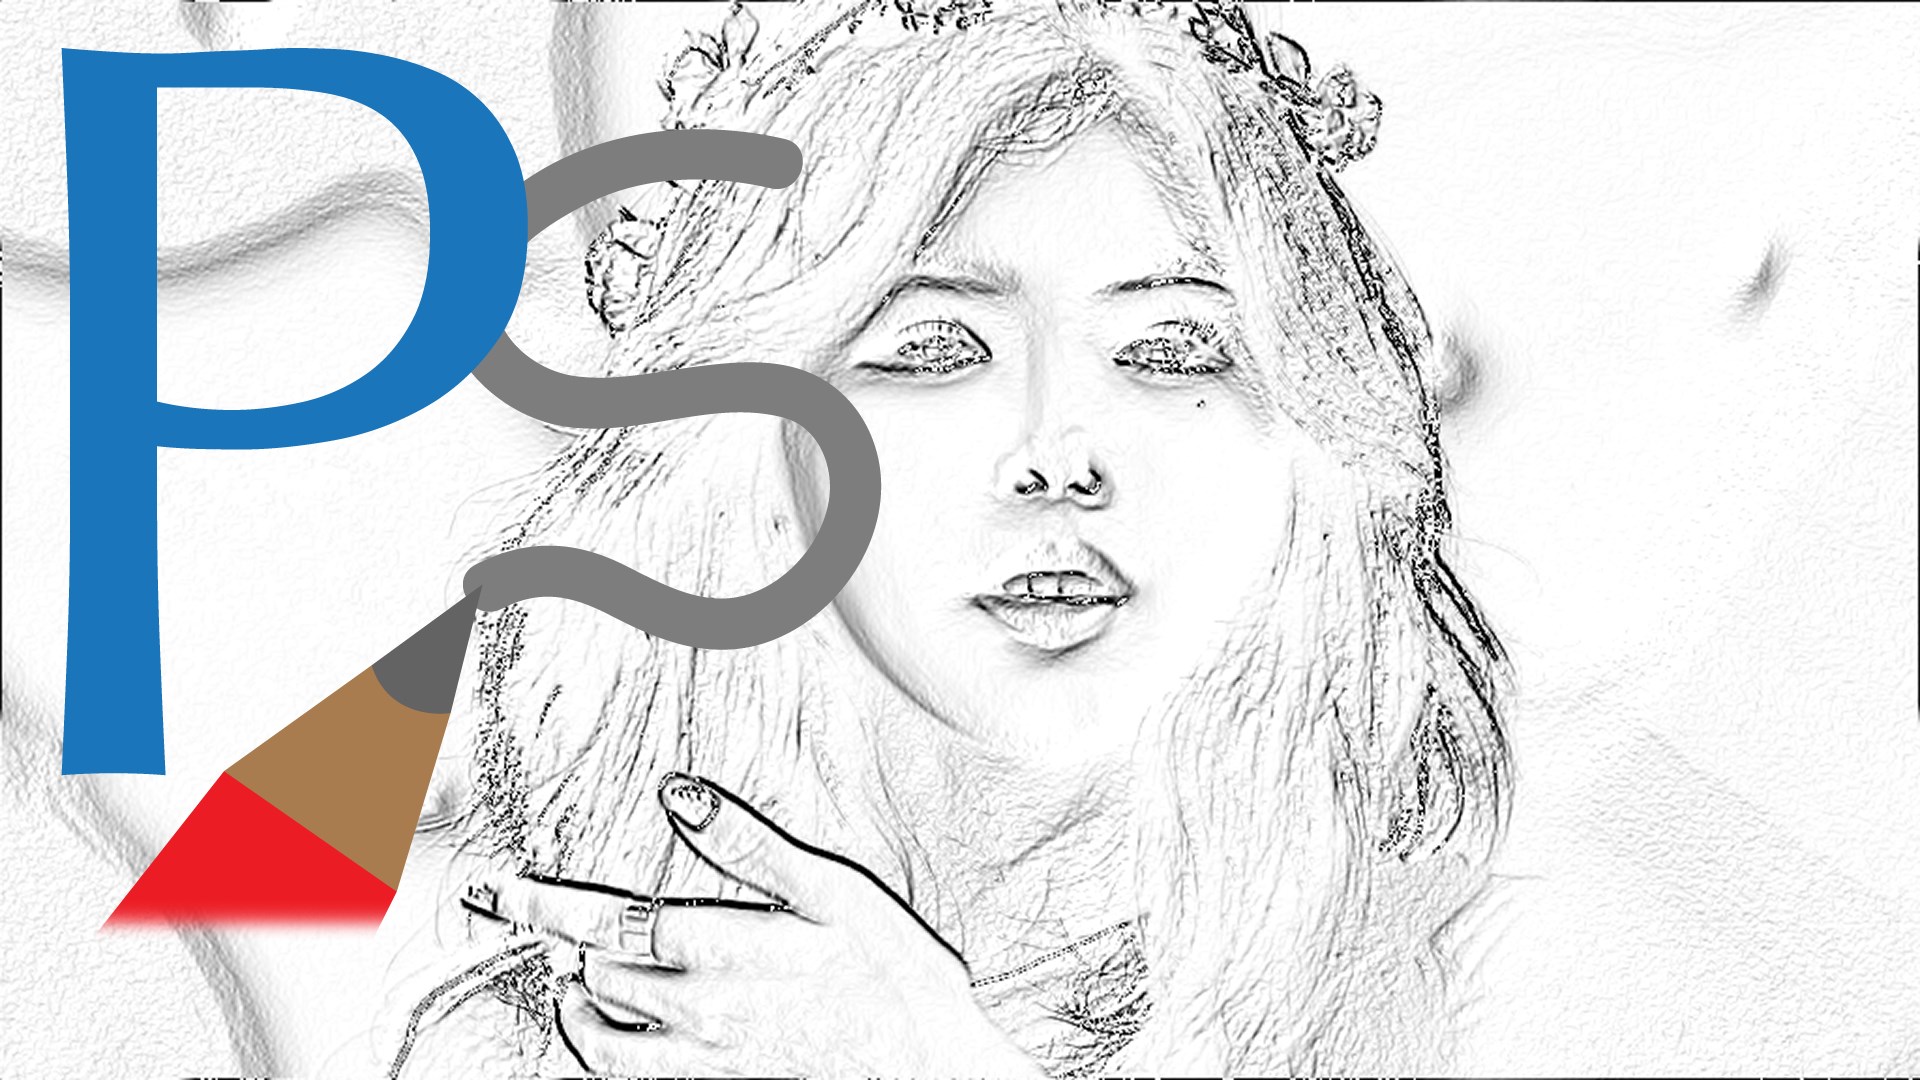 Convert Photo To Pencil Drawing App - How To Turn A Photo Into A Pencil ...